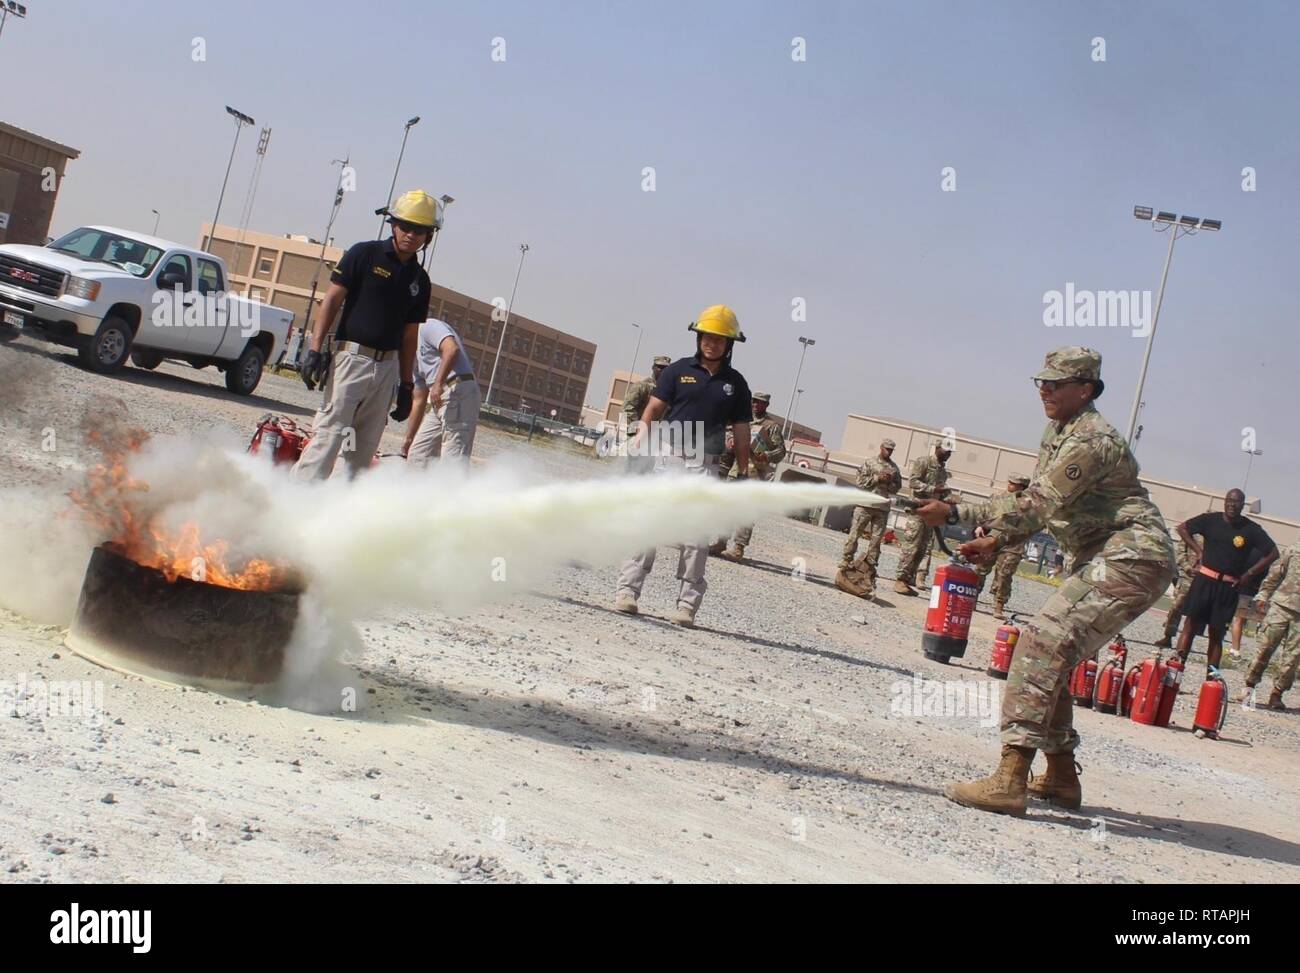 Sgt. Chantay N. Webster, 840th Transportation Battalion, approaches and extinguishes a controlled flame during safety training at Camp Arifjan, Kuwait, Feb. 1, 2019. Stock Photo